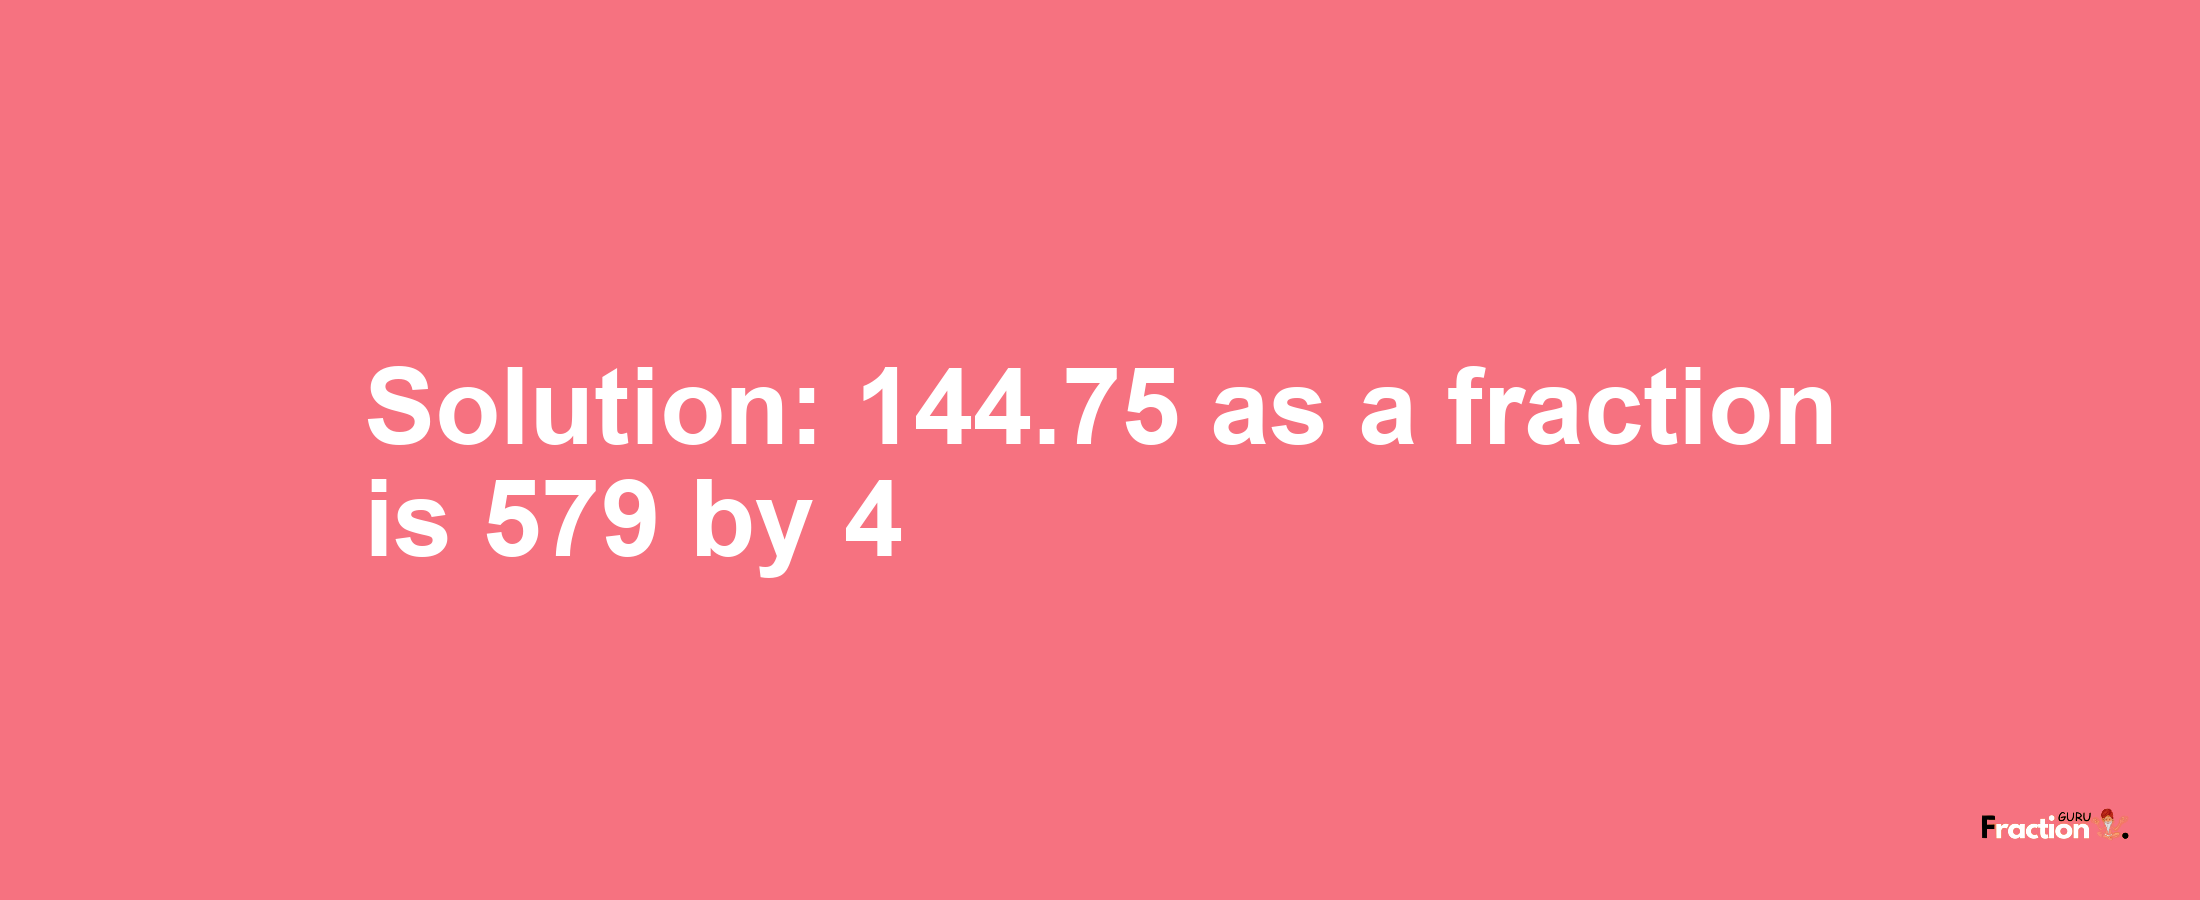 Solution:144.75 as a fraction is 579/4